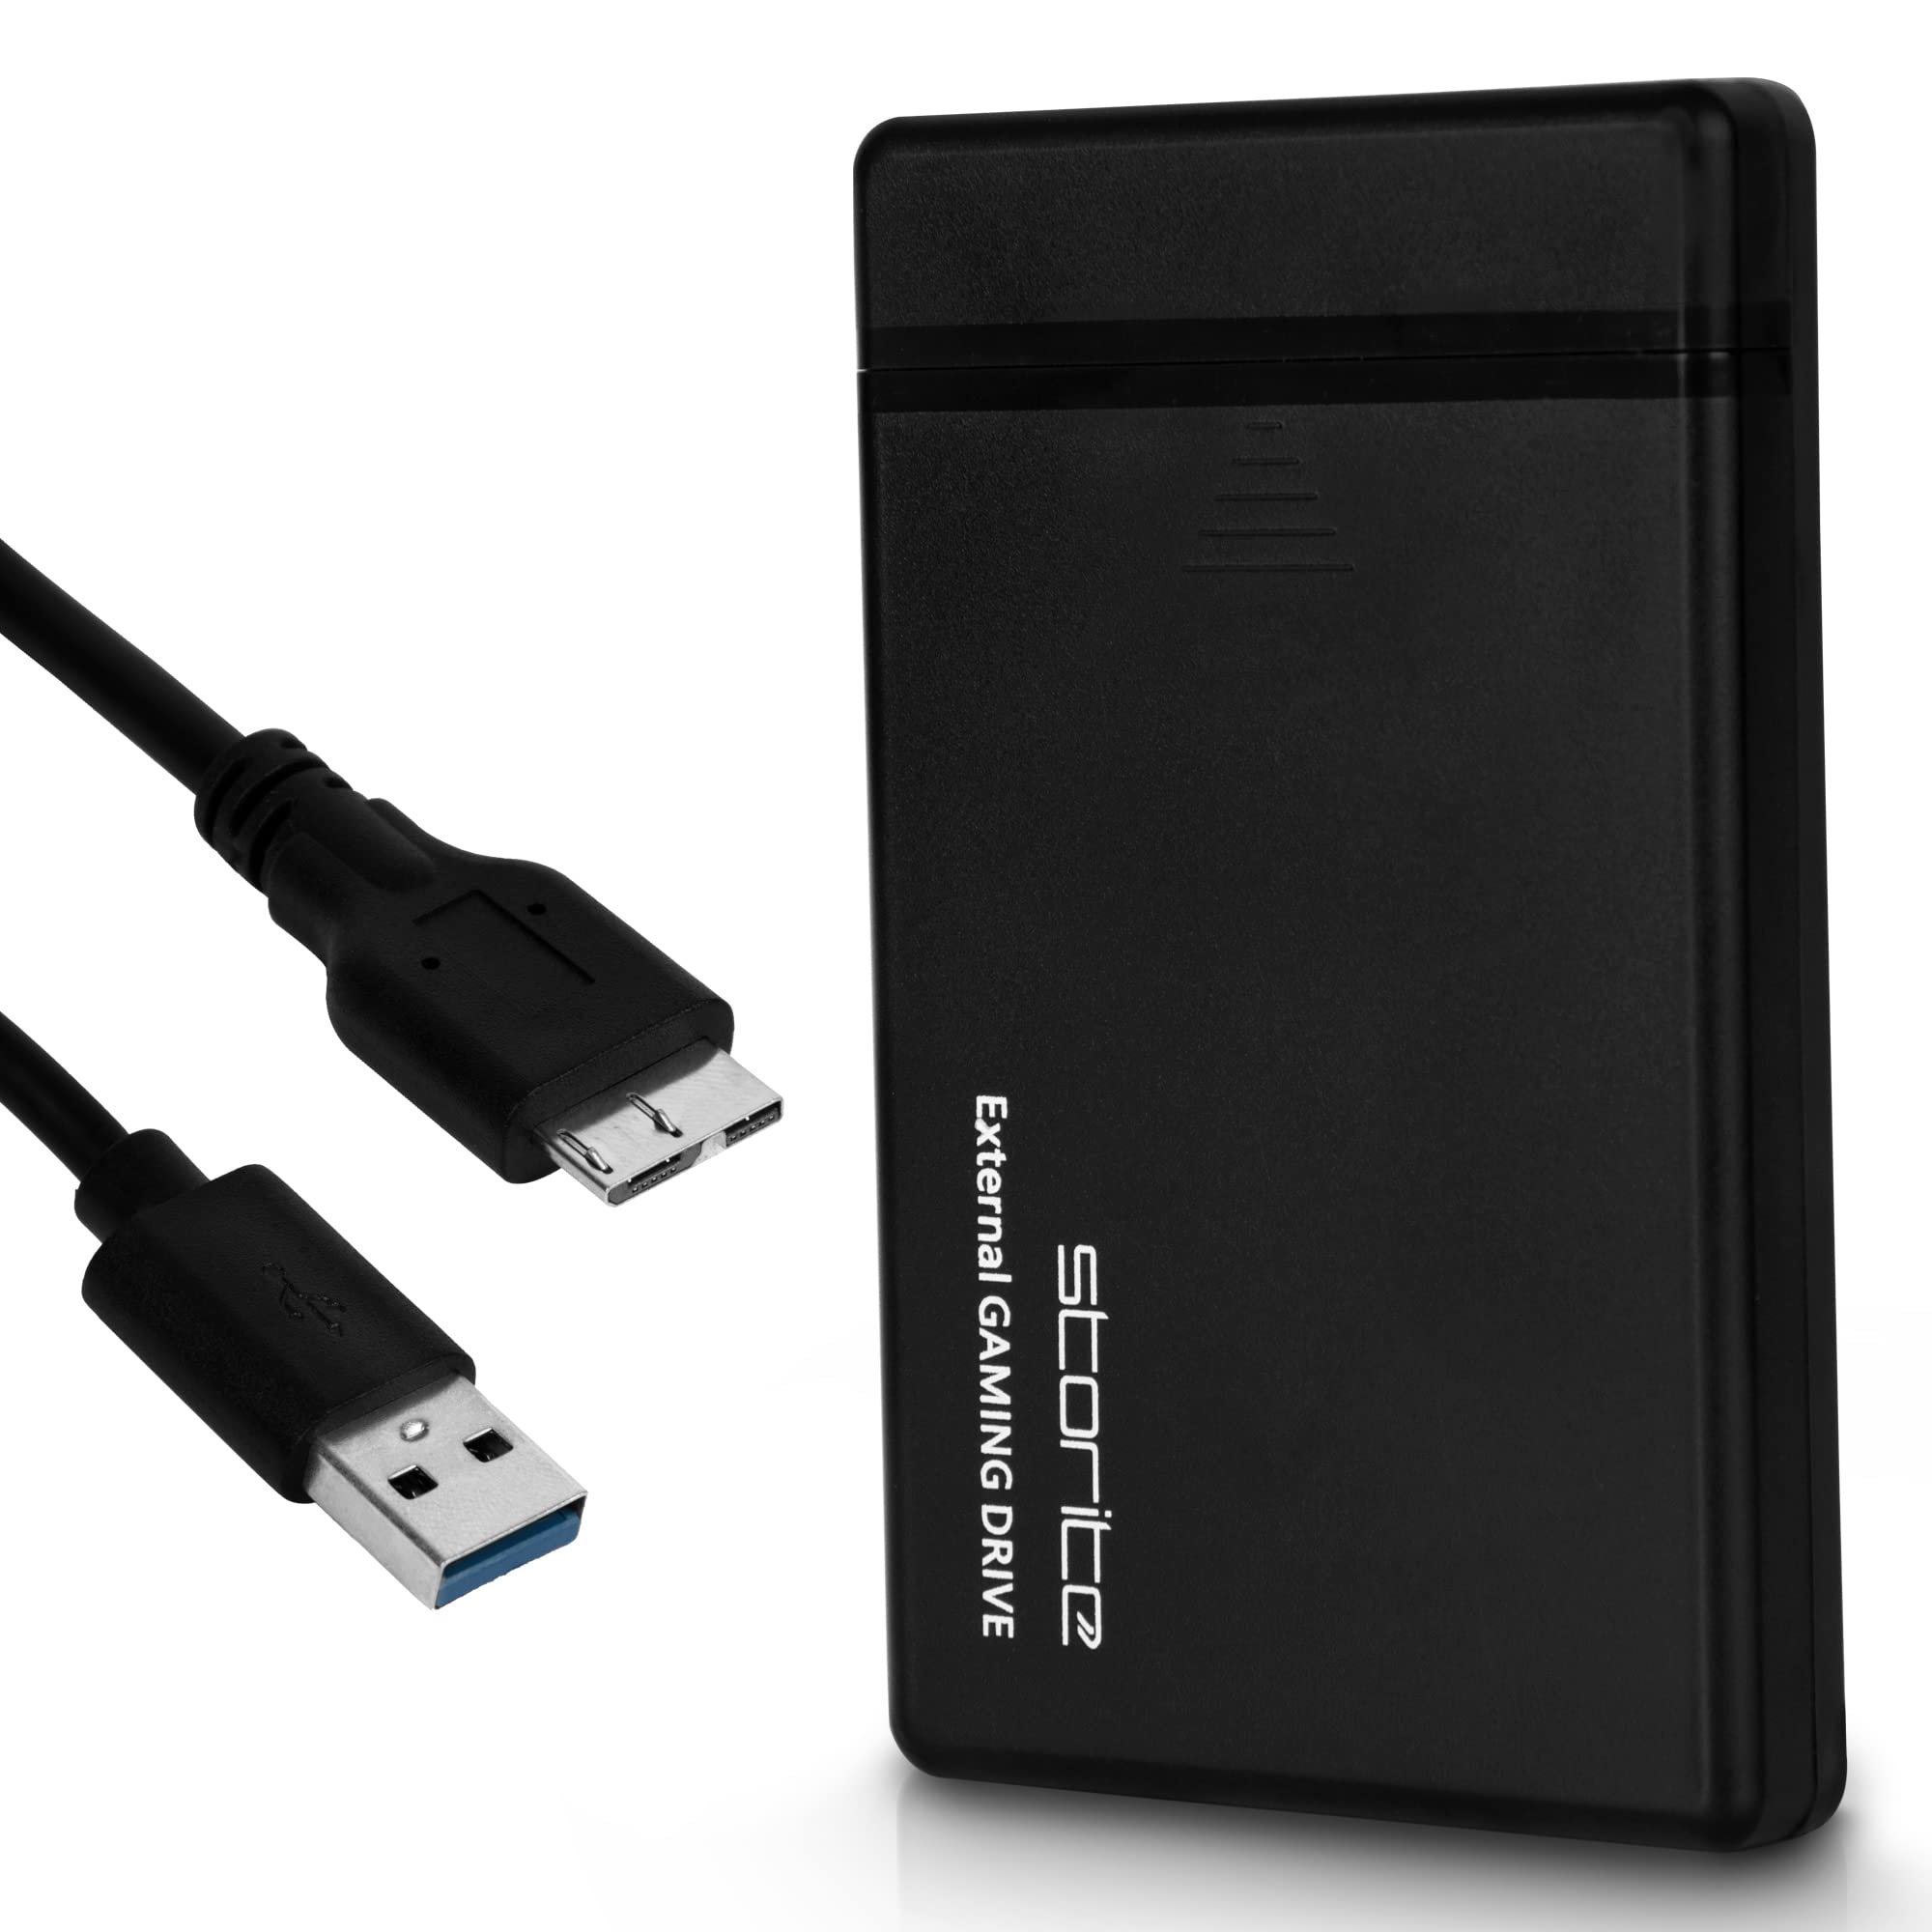 External hard drive with additional storage